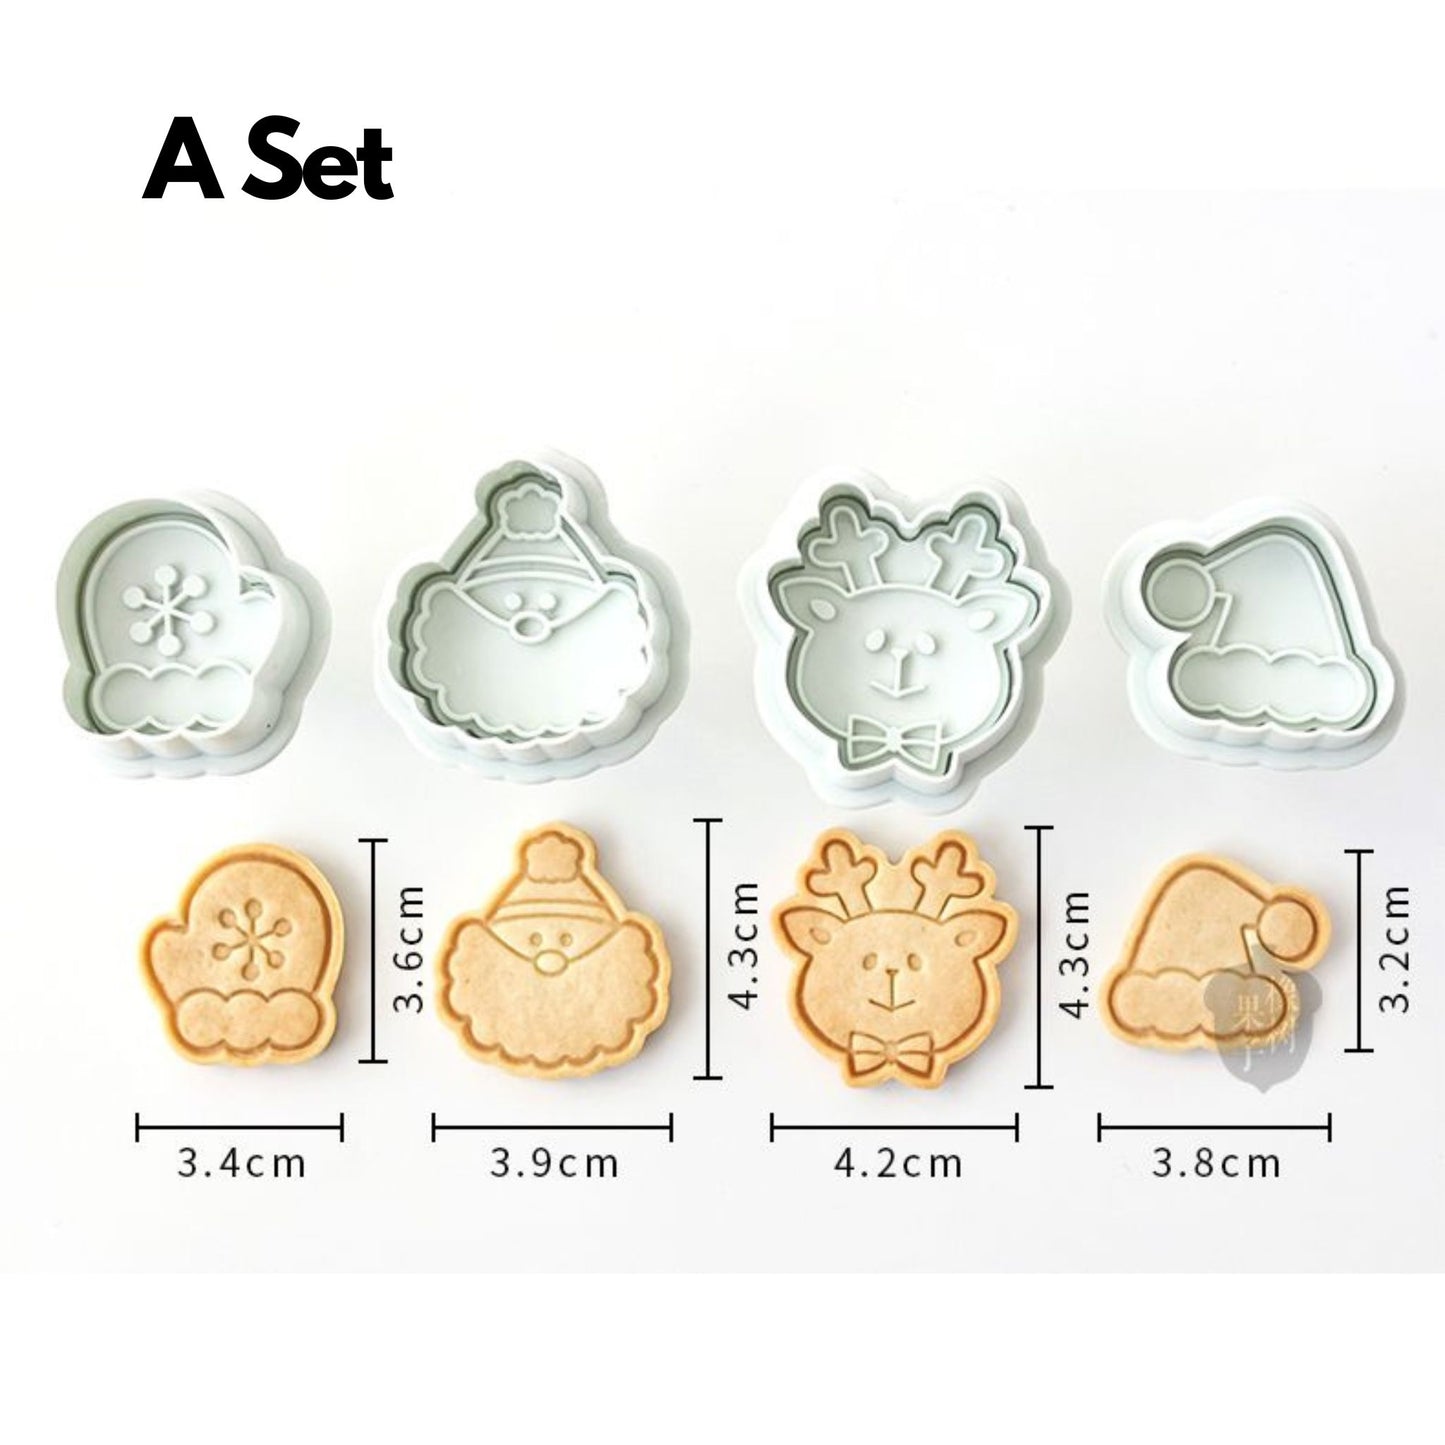 Create Christmas Cookies with Santa, Reindeer & Christmas Hat Cookie Molds for Party